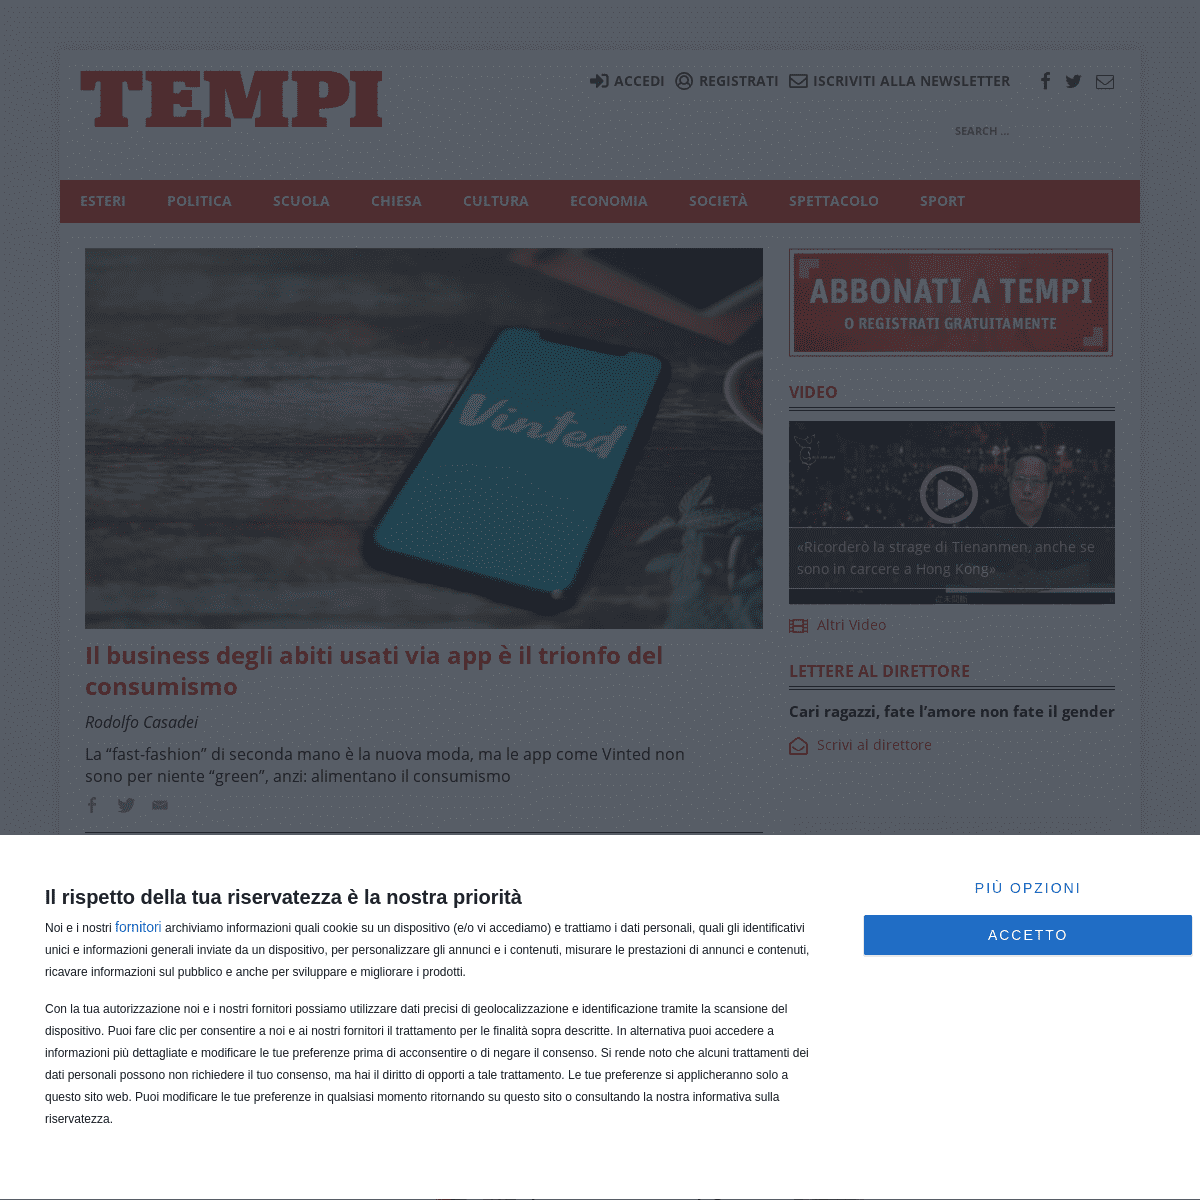 A complete backup of https://tempi.it